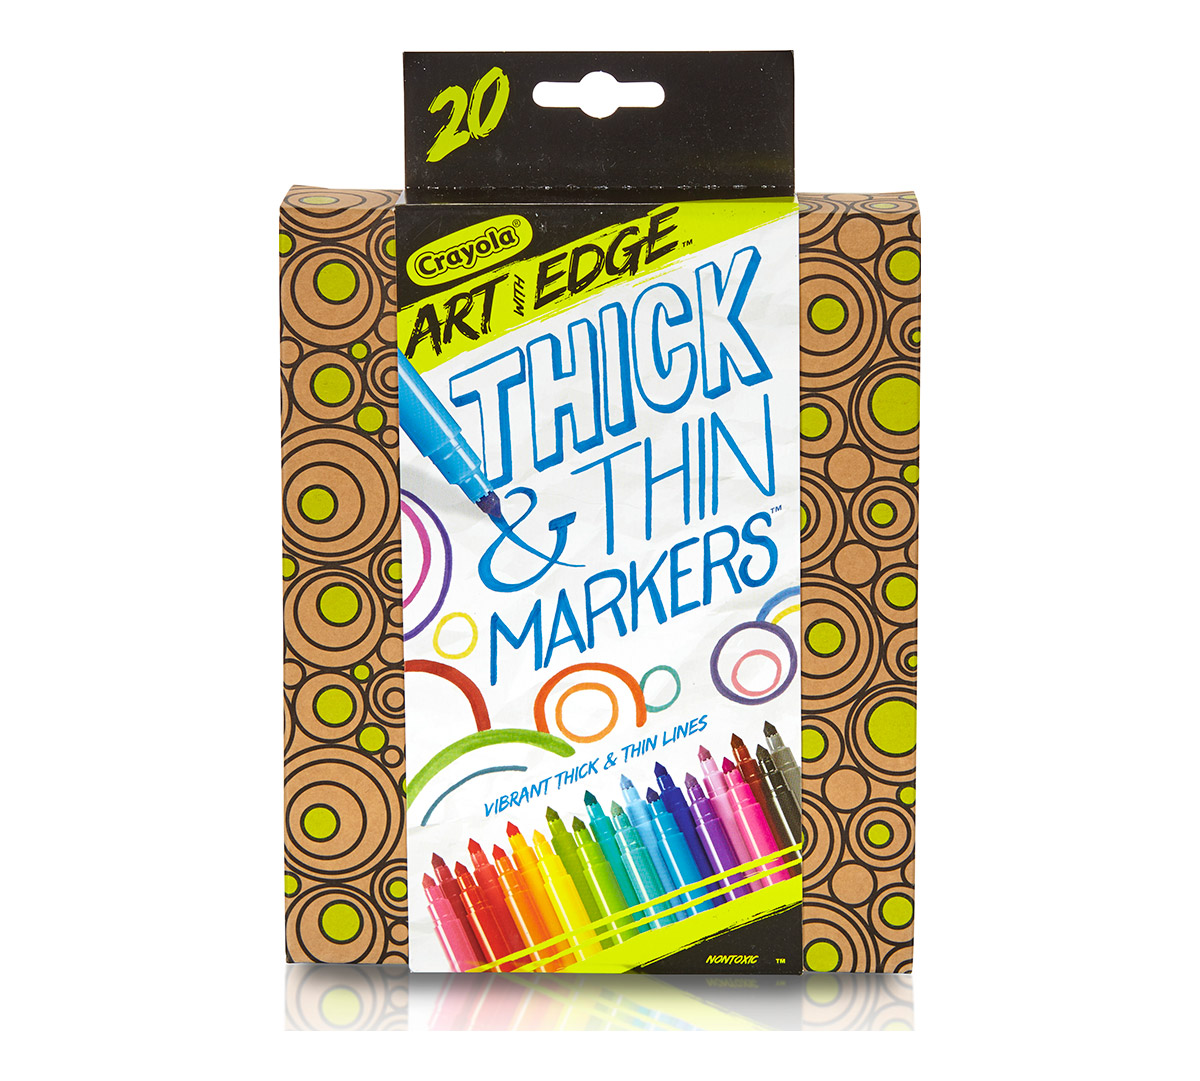 Crayola - Create thick or thin lines with the Crayola Super Tips or Crayola  Broad Line Marker! #crayola #colors #Marker #art